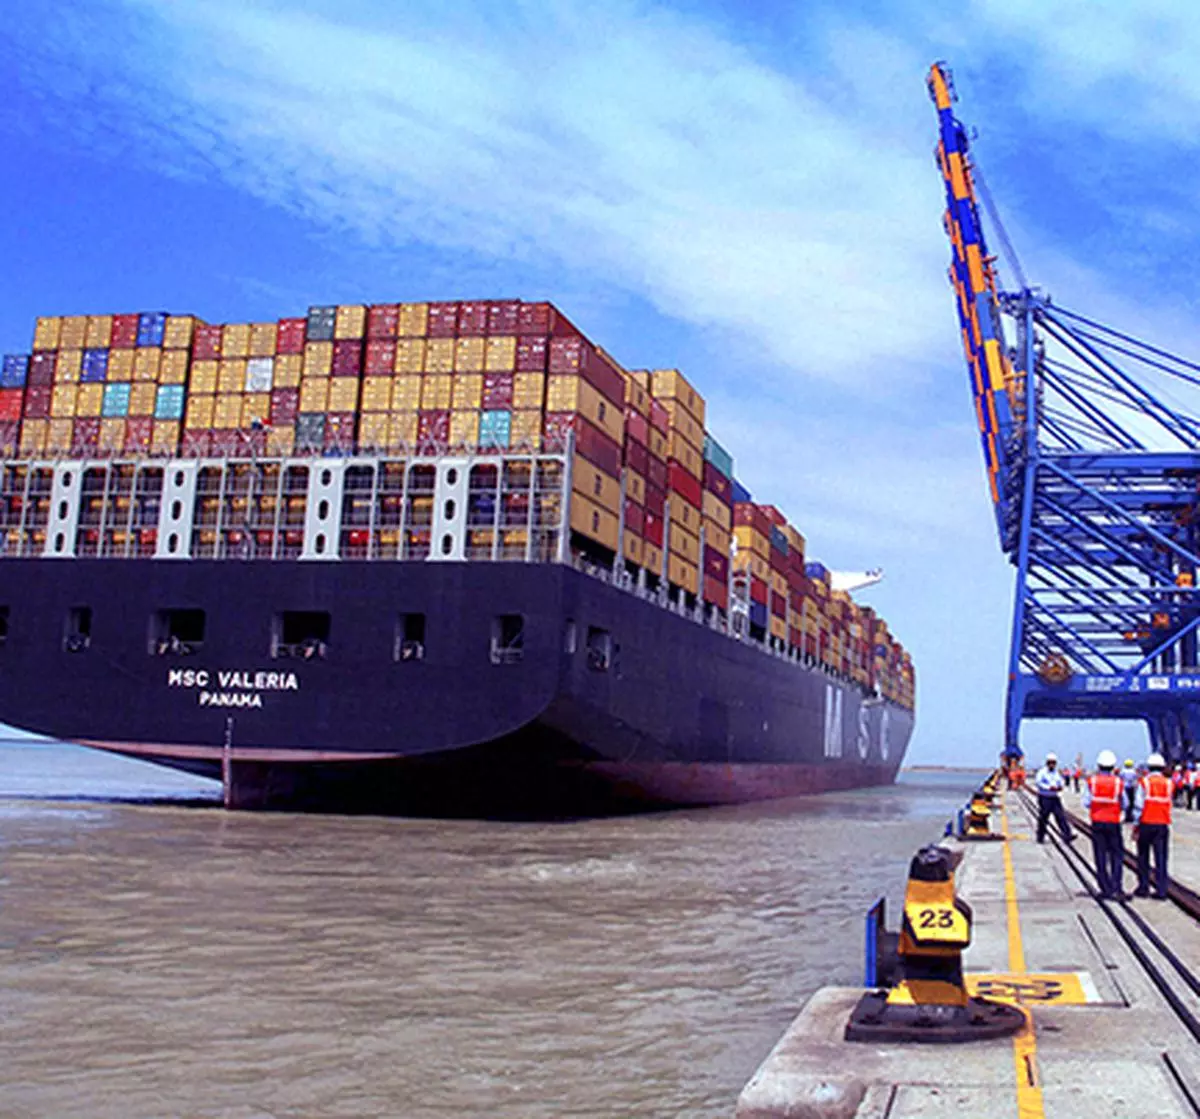 The turnaround times for ships at Indian ports need to be reduced drastically